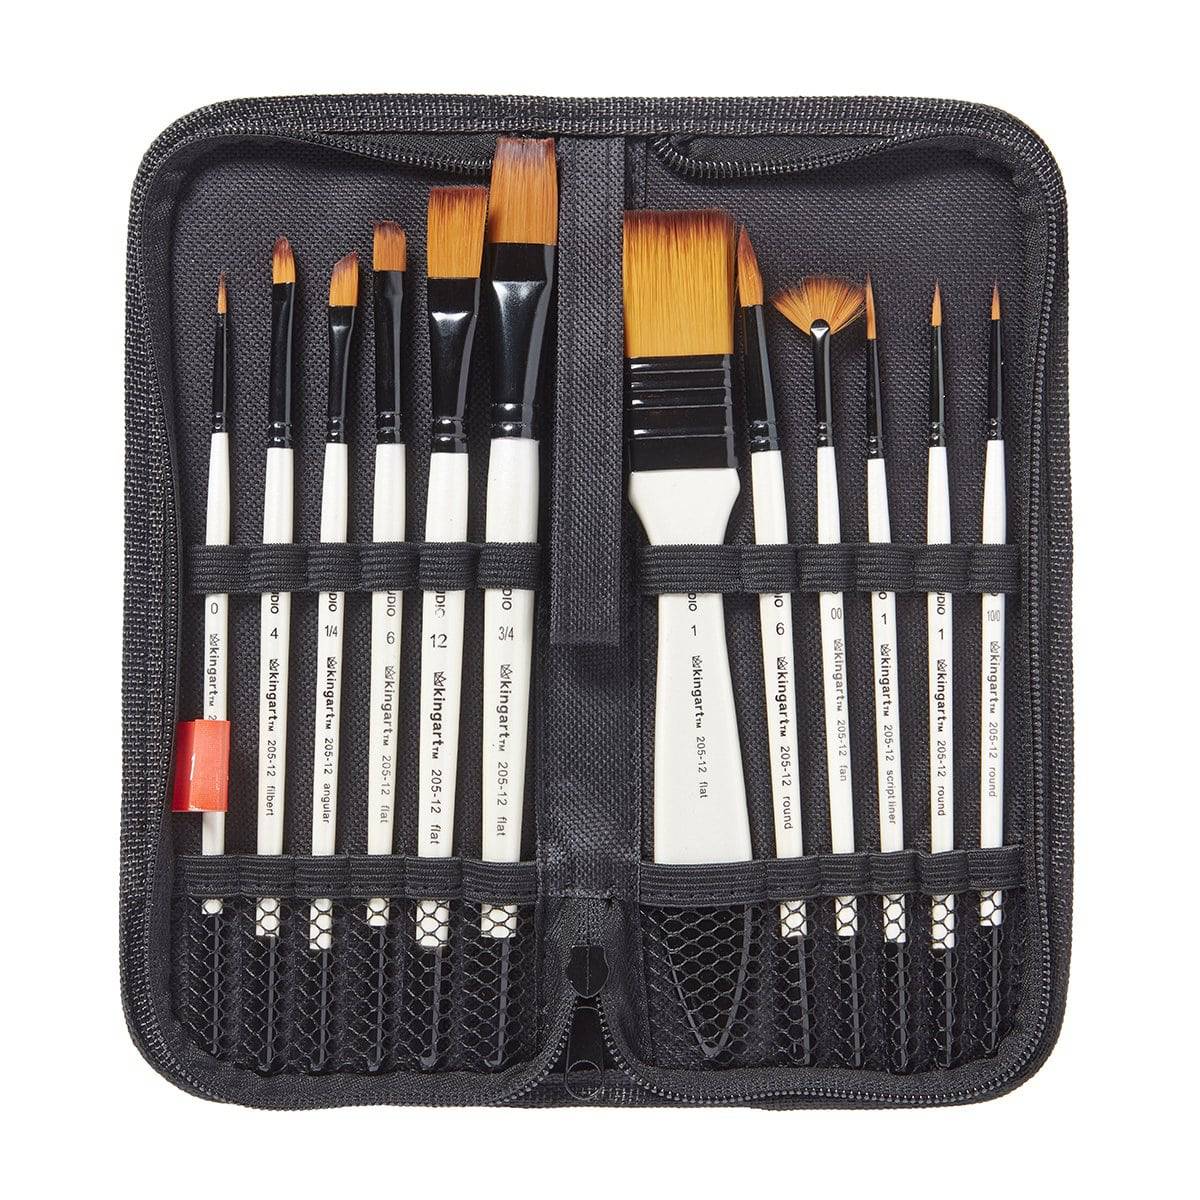 All in One, Travel-Friendly, 25-pc Oil Painting Art Set. Incl. Paints,  Brushes, Tabletop Easel, Palette and Accessories in Sturdy Carrying Case.  Great